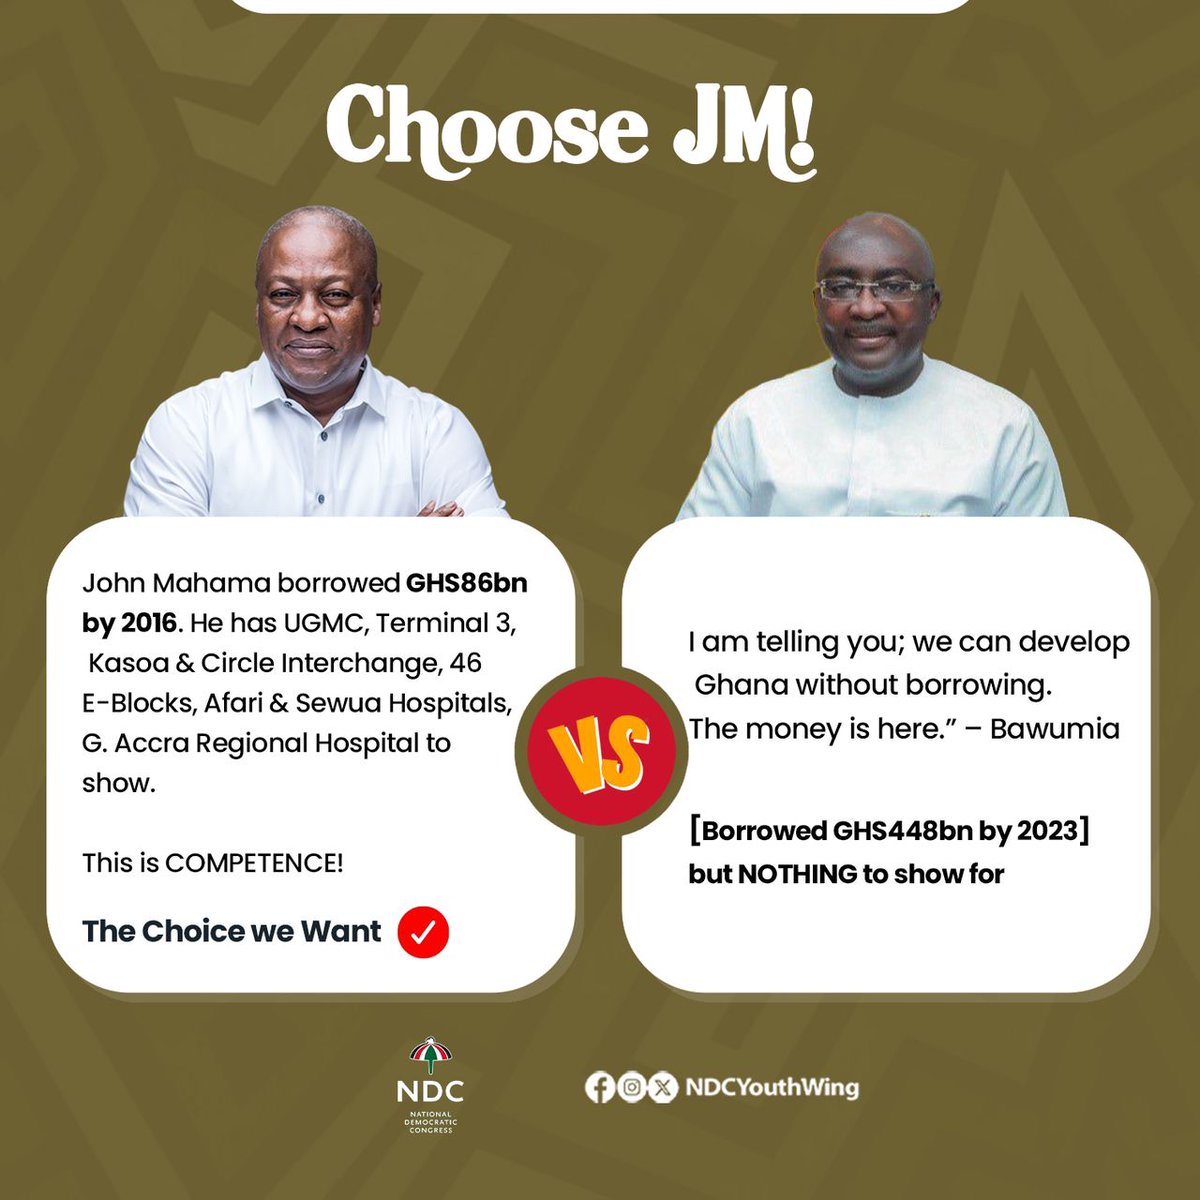 Choose between truth and progress versus lies, incompetence, and failed promises. Be the judge and choose JM. #ChangeIsComing